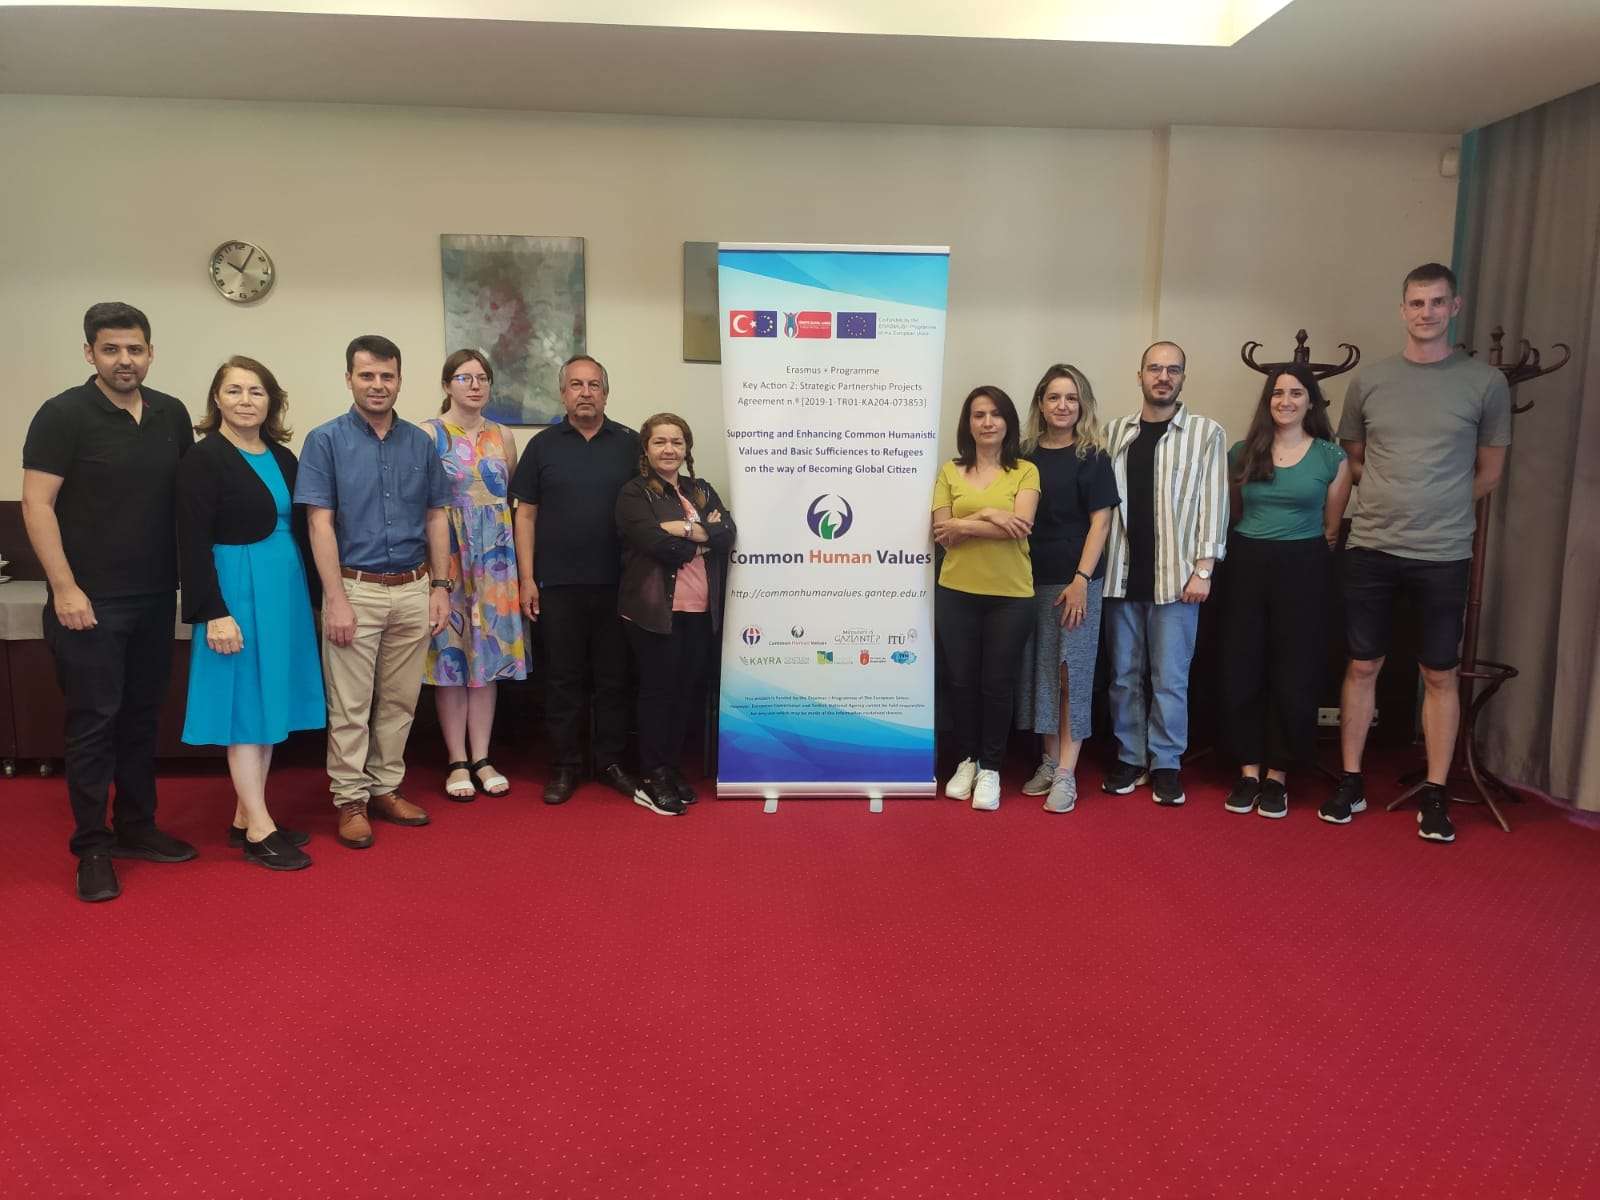 “Supporting and Enhancing Common Humanistic Values and Basic Sufficiency to Refugees on the Way of Becoming a Global Citizen” final meeting in Vilnius